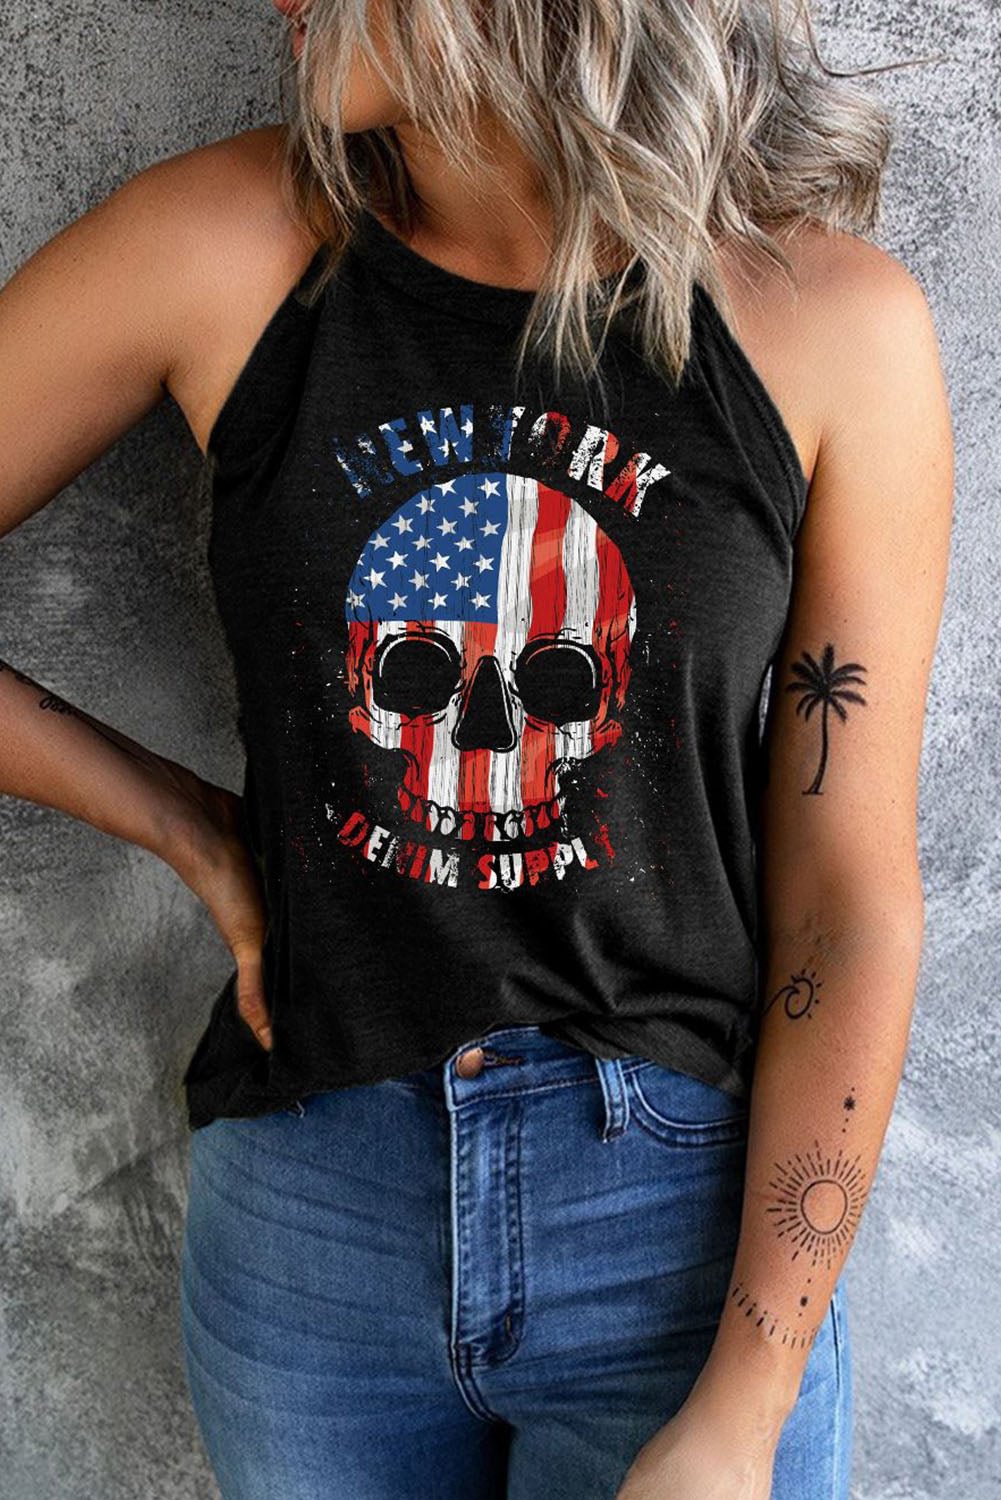 American Flag Skull Tank Tops Patriotic 4th of july Fourth of July Red White And Blue Red White Blue